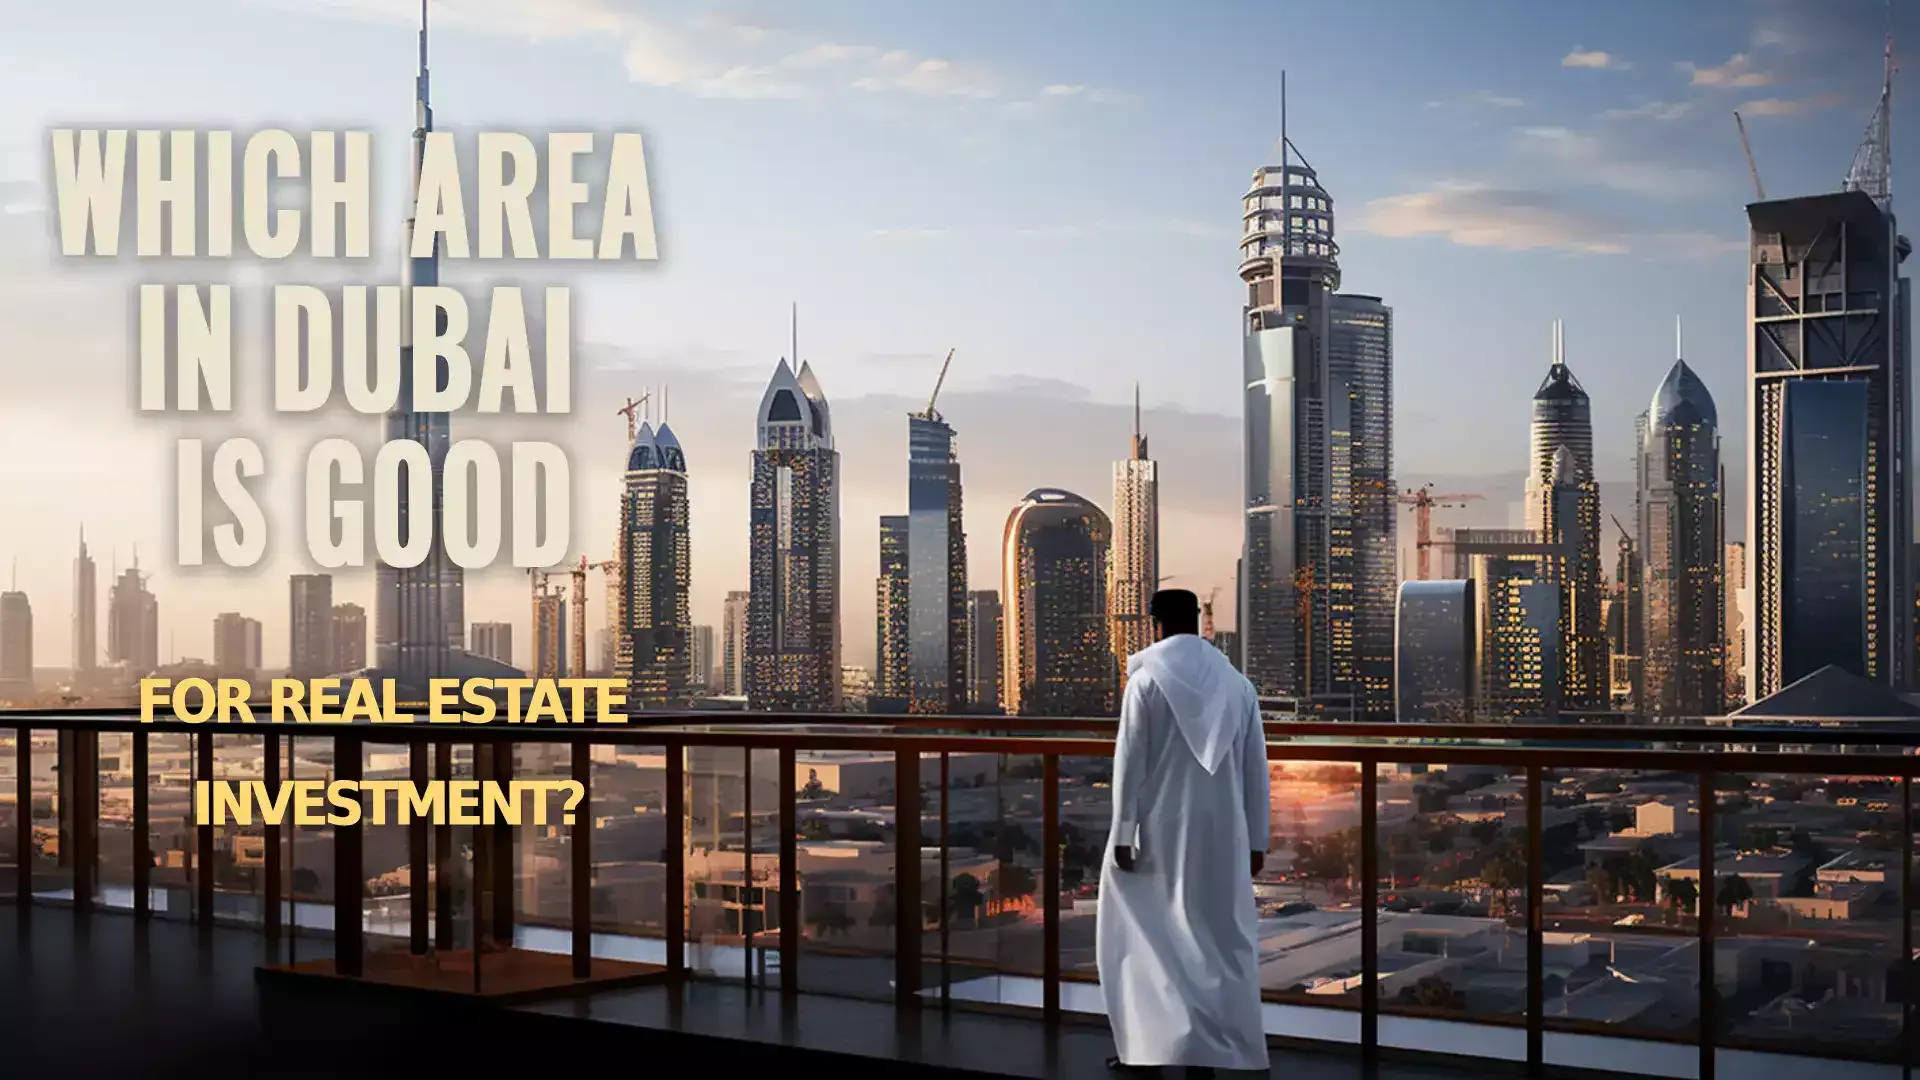 Image showcasing the compelling reasons and advantages of doing business in Dubai